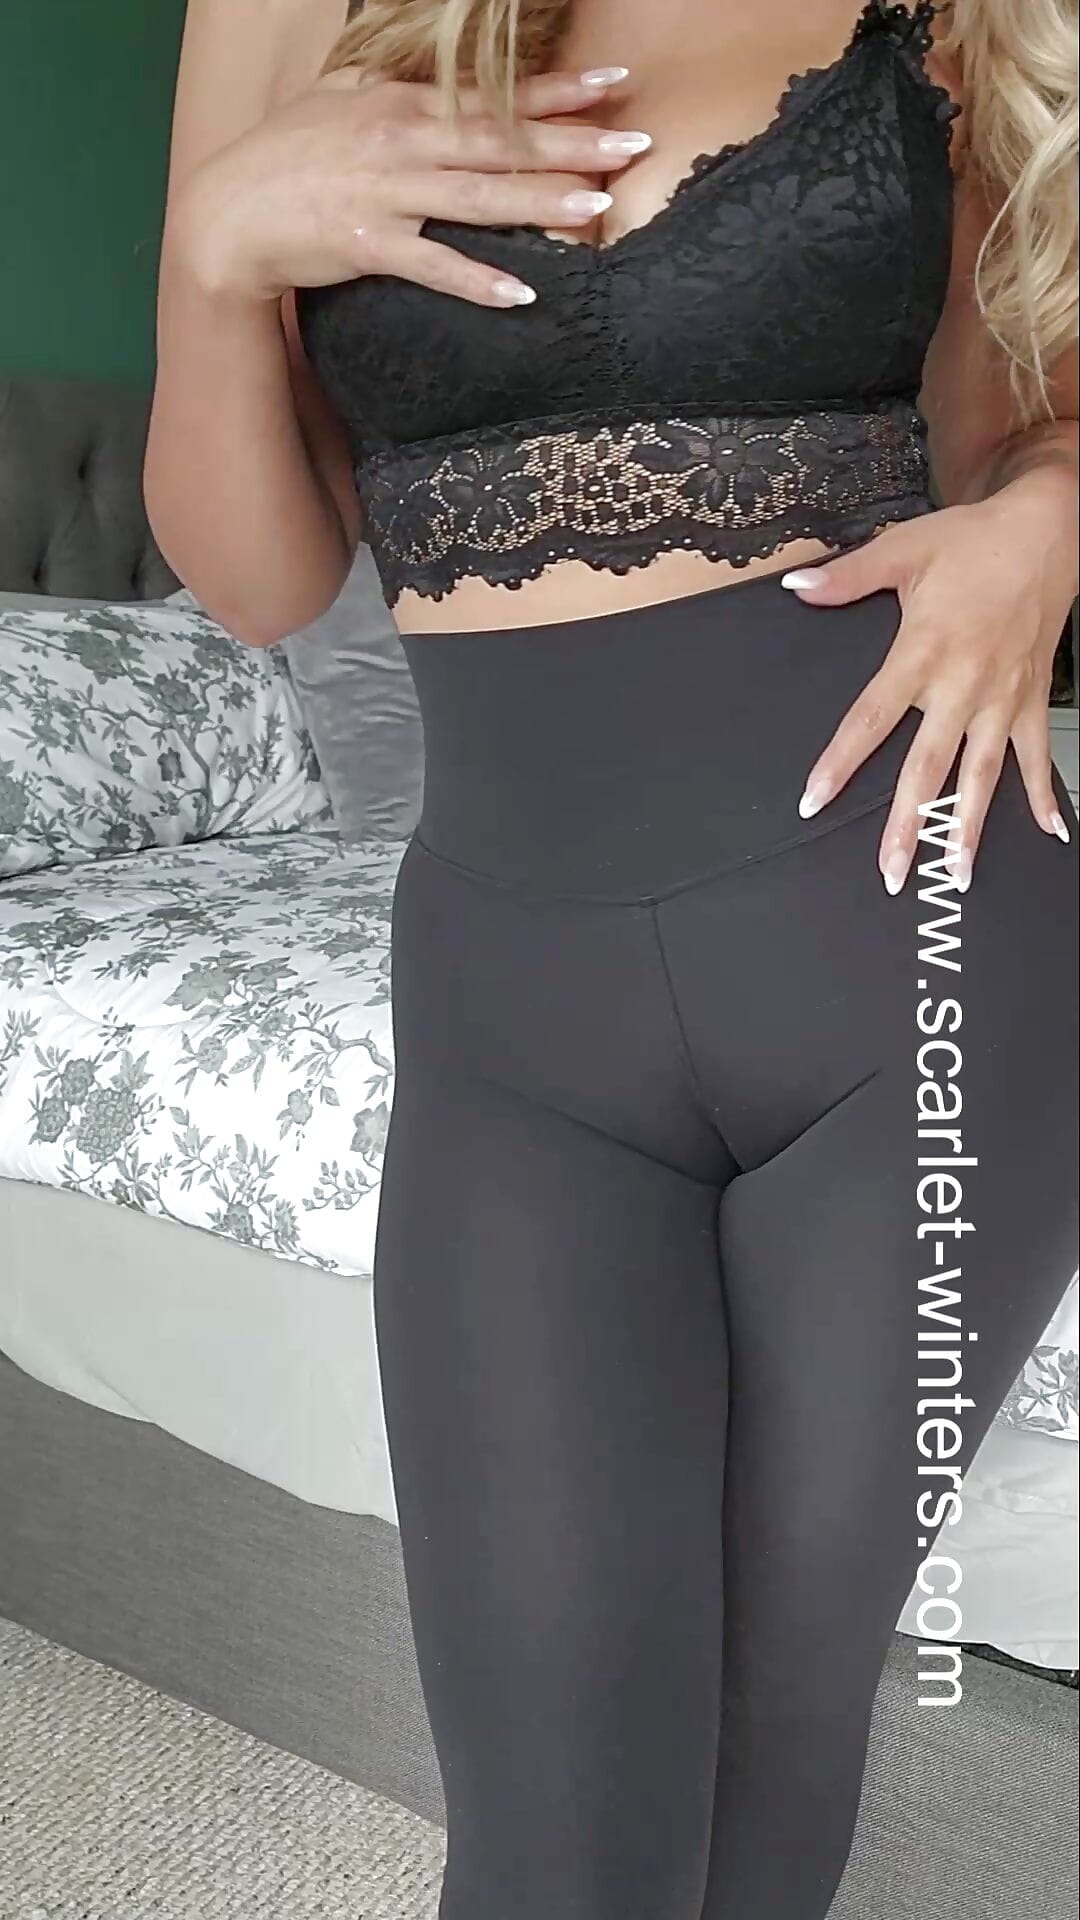 Busty Teacher tell you how to jerk off with her leggings JOI